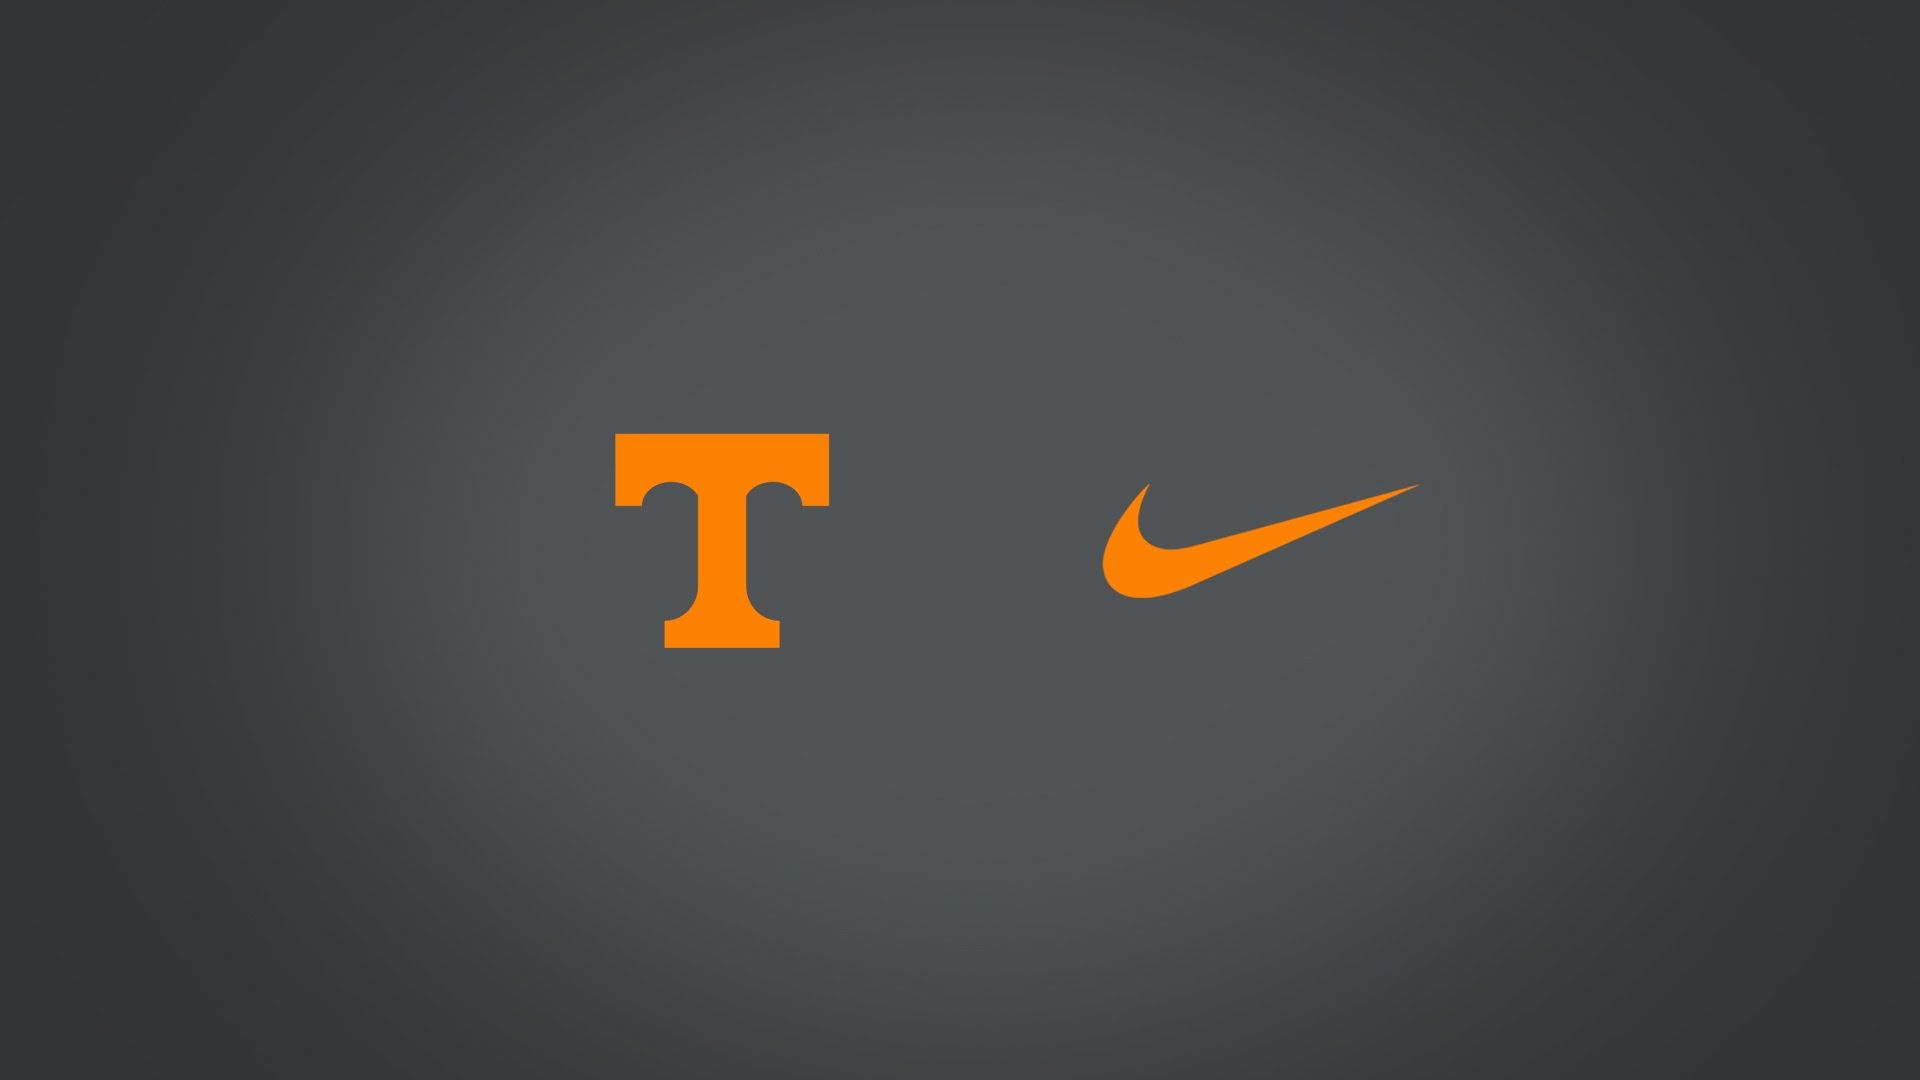 Tennessee/Nike Reveal Live Show - YouTube